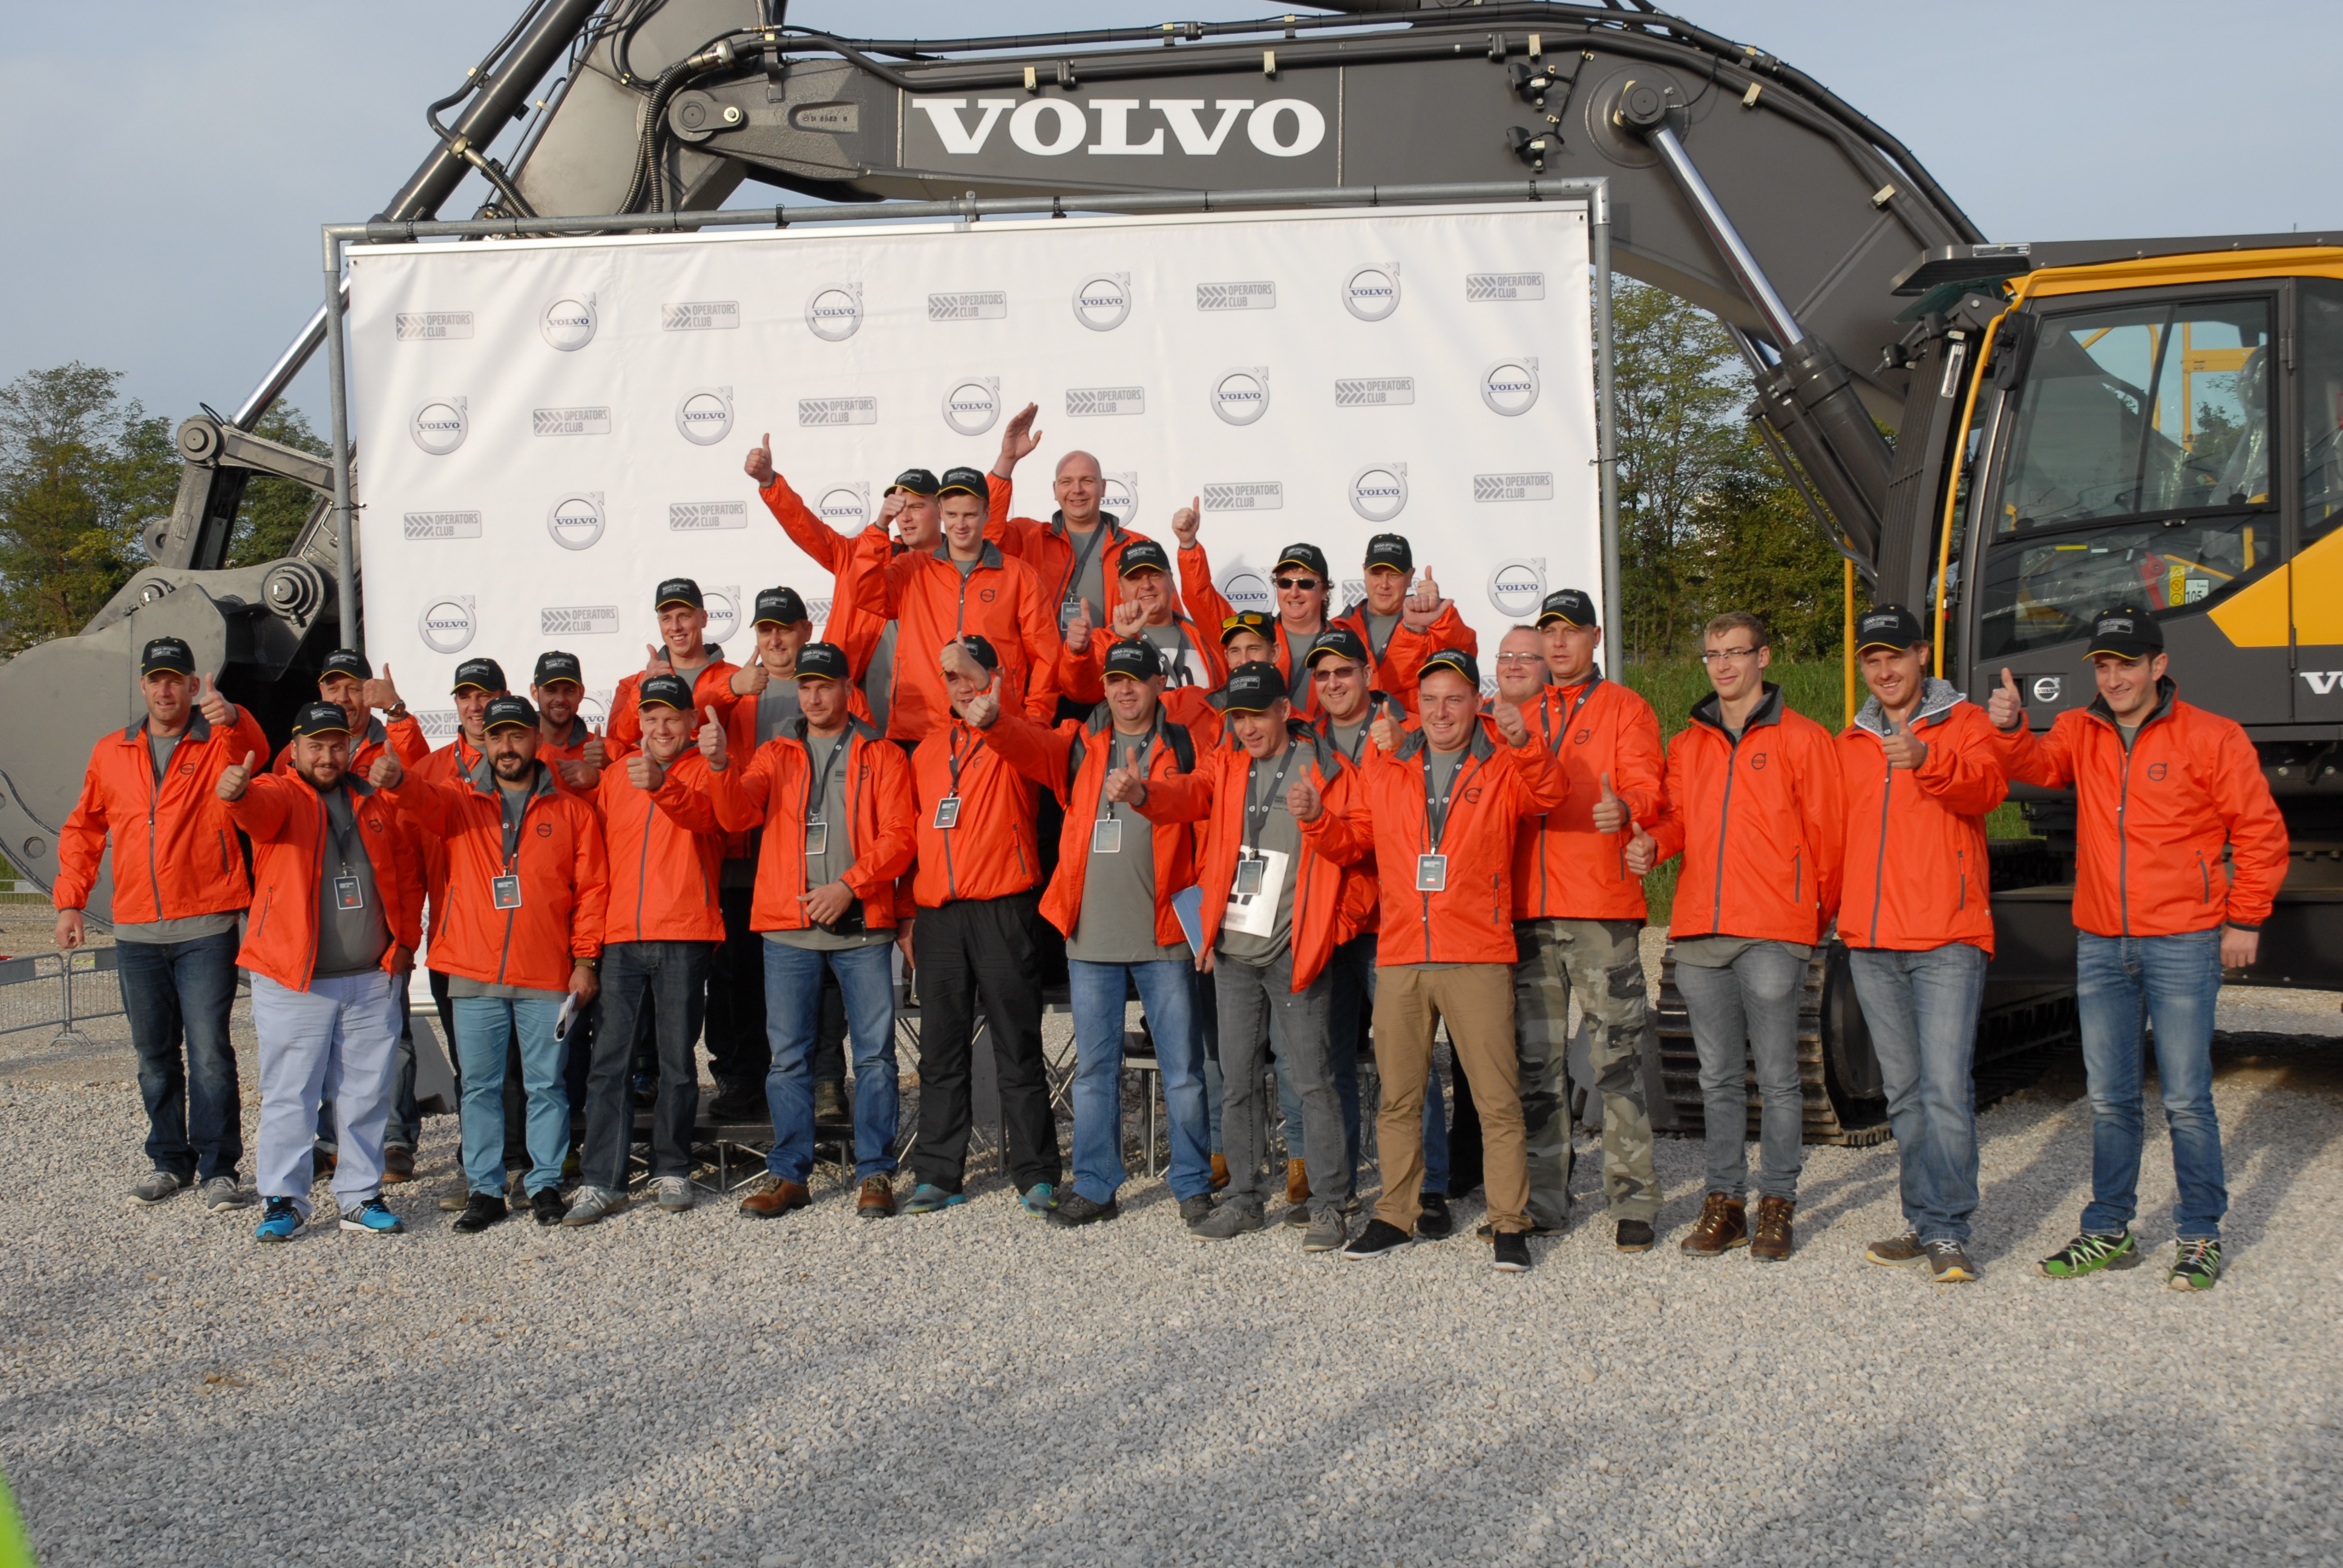 The Volvo CE Operators Club Final Approaches